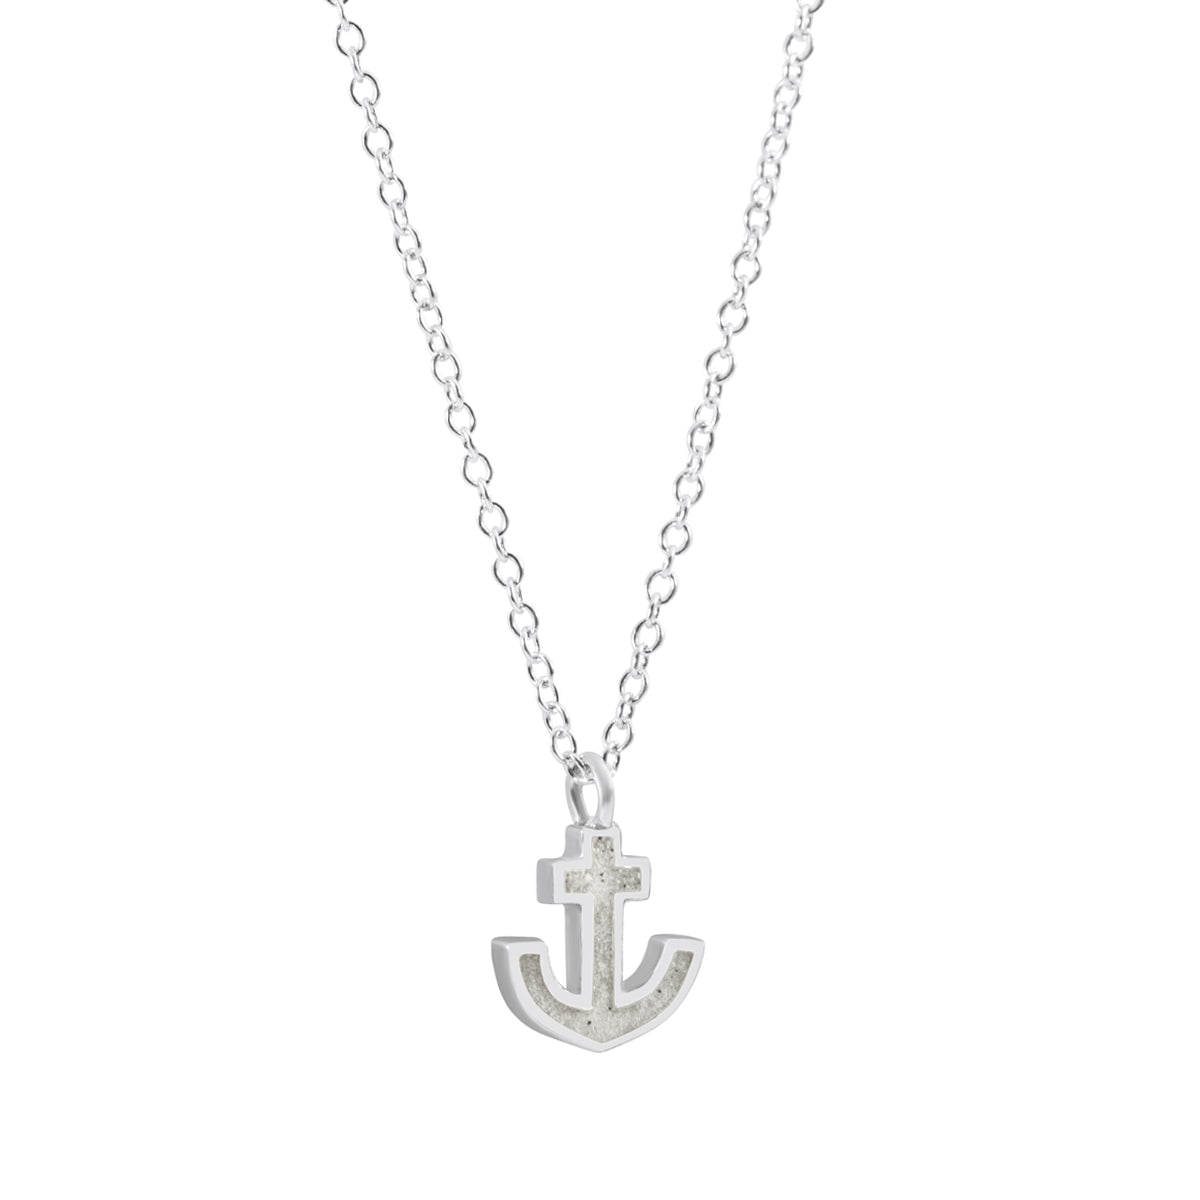 Dainty Anchor Necklace - Silver